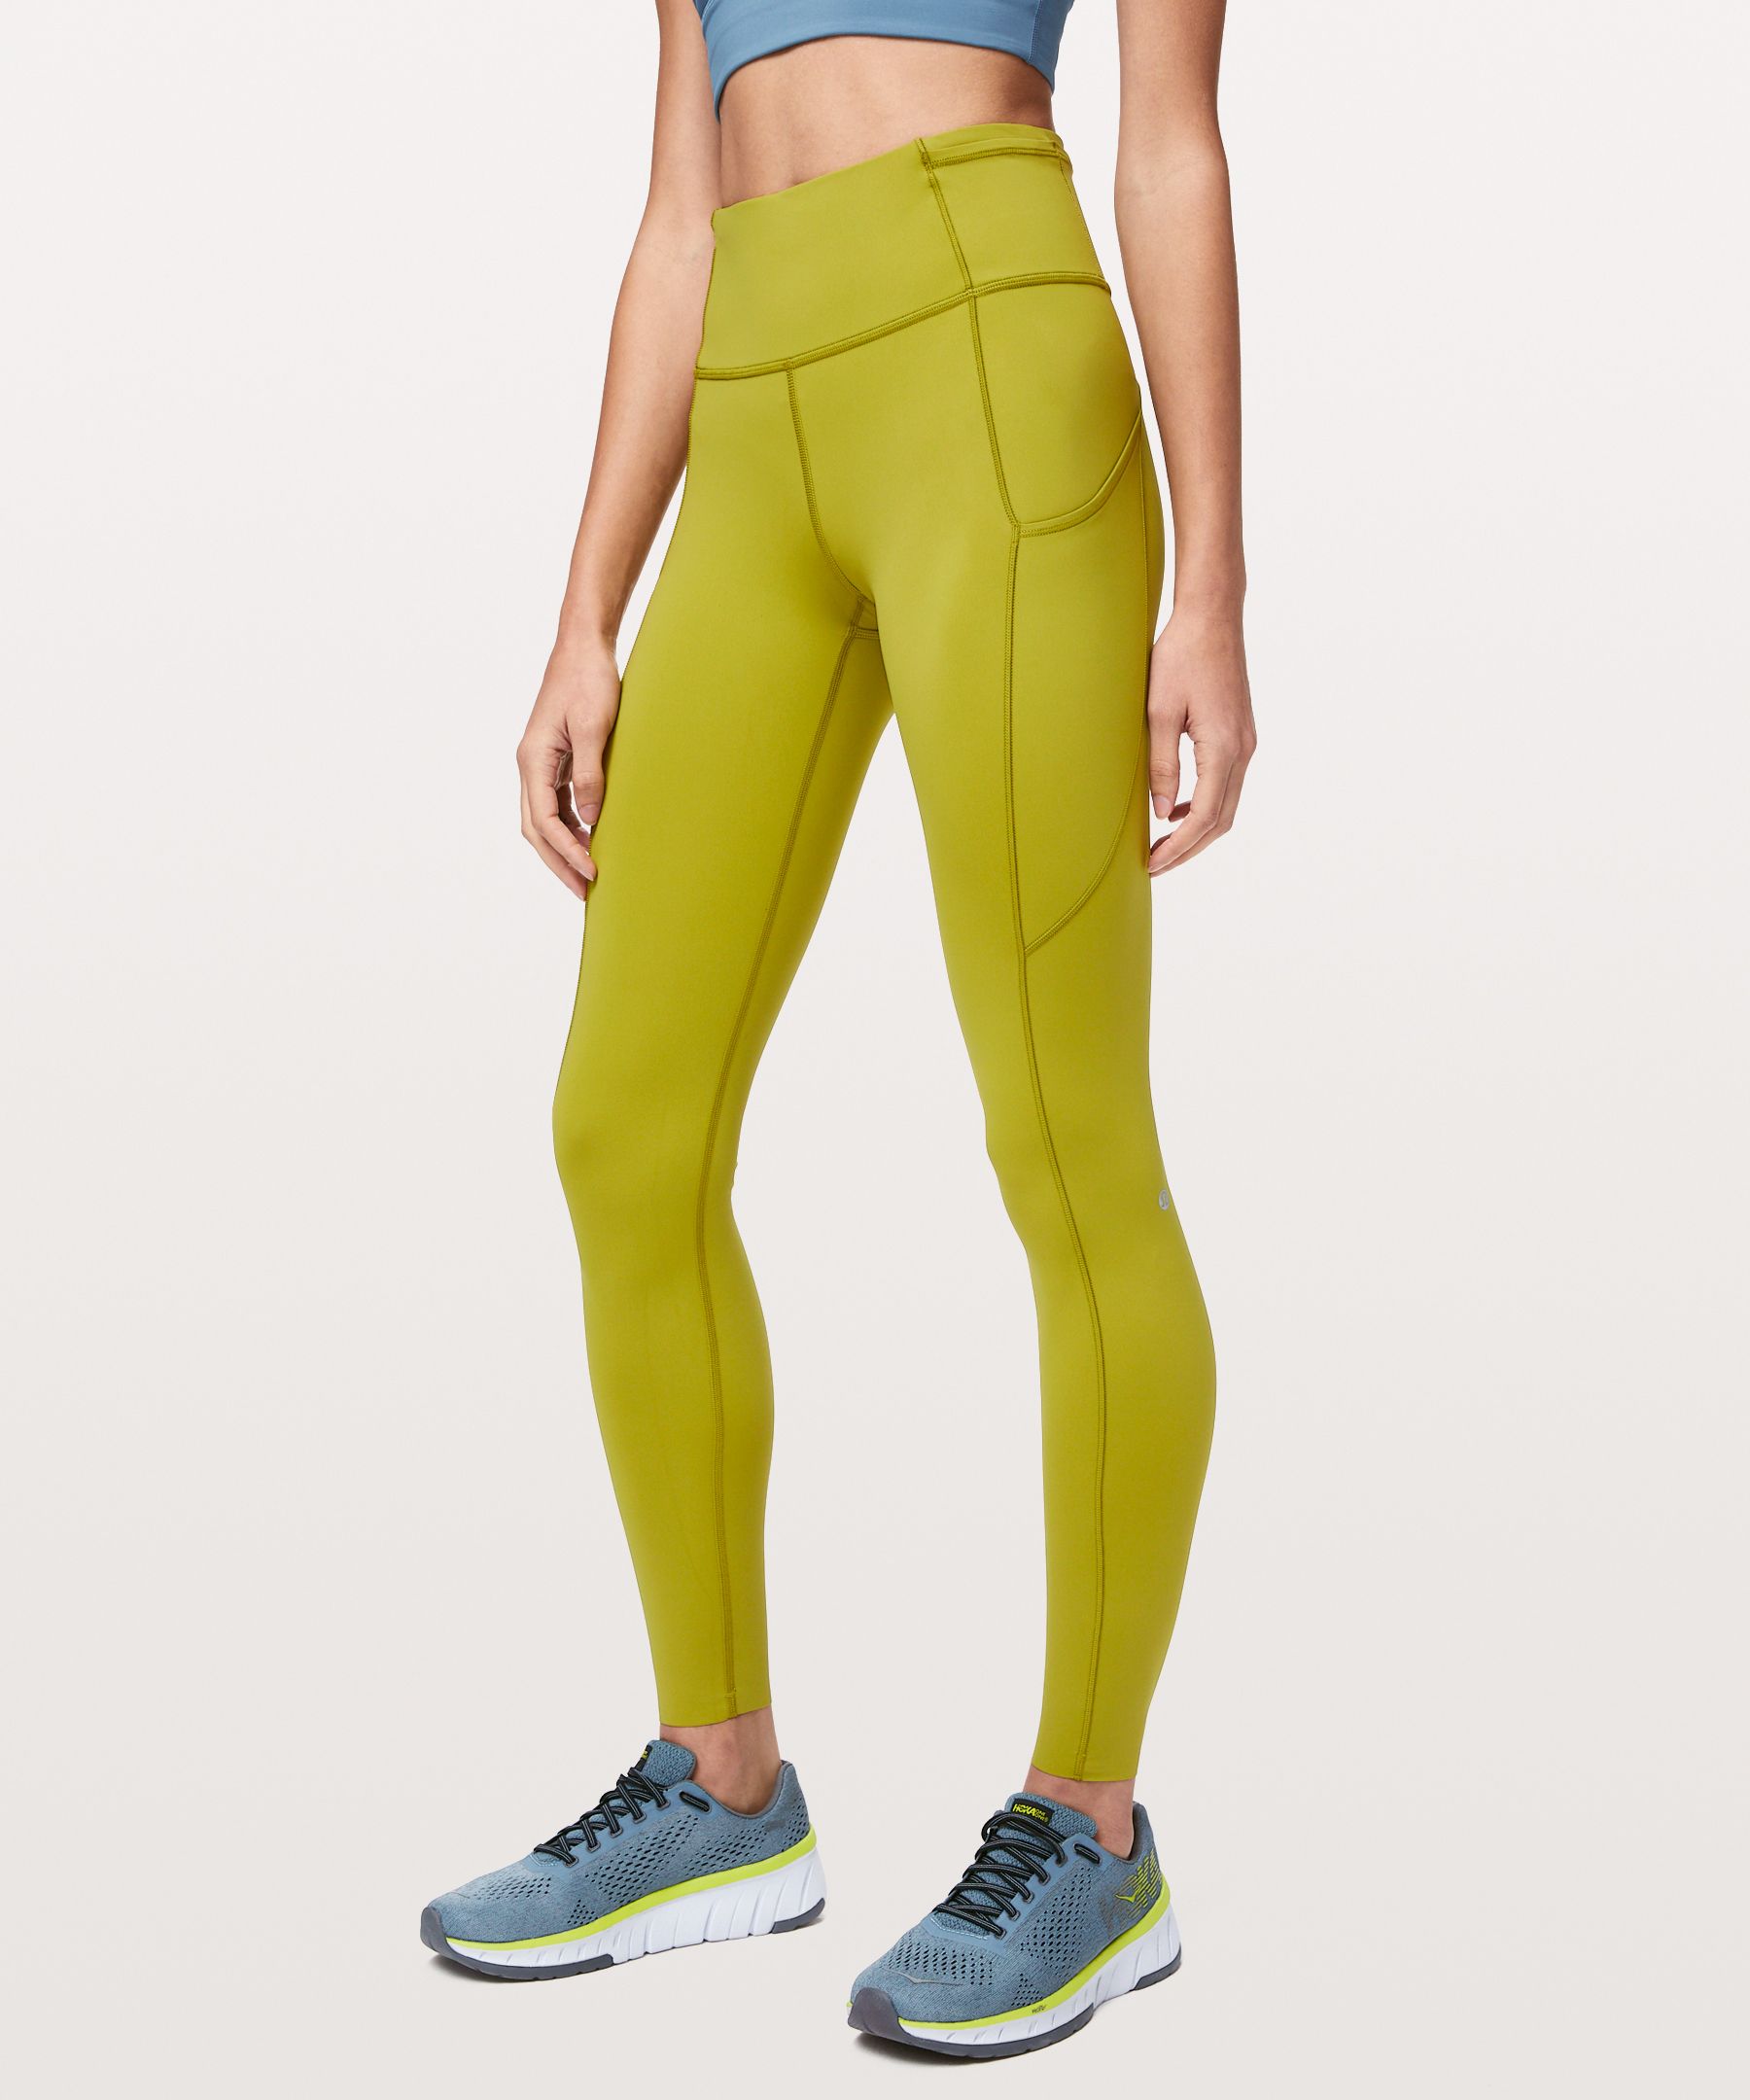 Larkspur Fast & Frees make me happy to run. They are comfortable, stay put  and their vivd color make this dreary morning a little brighter. : r/ lululemon